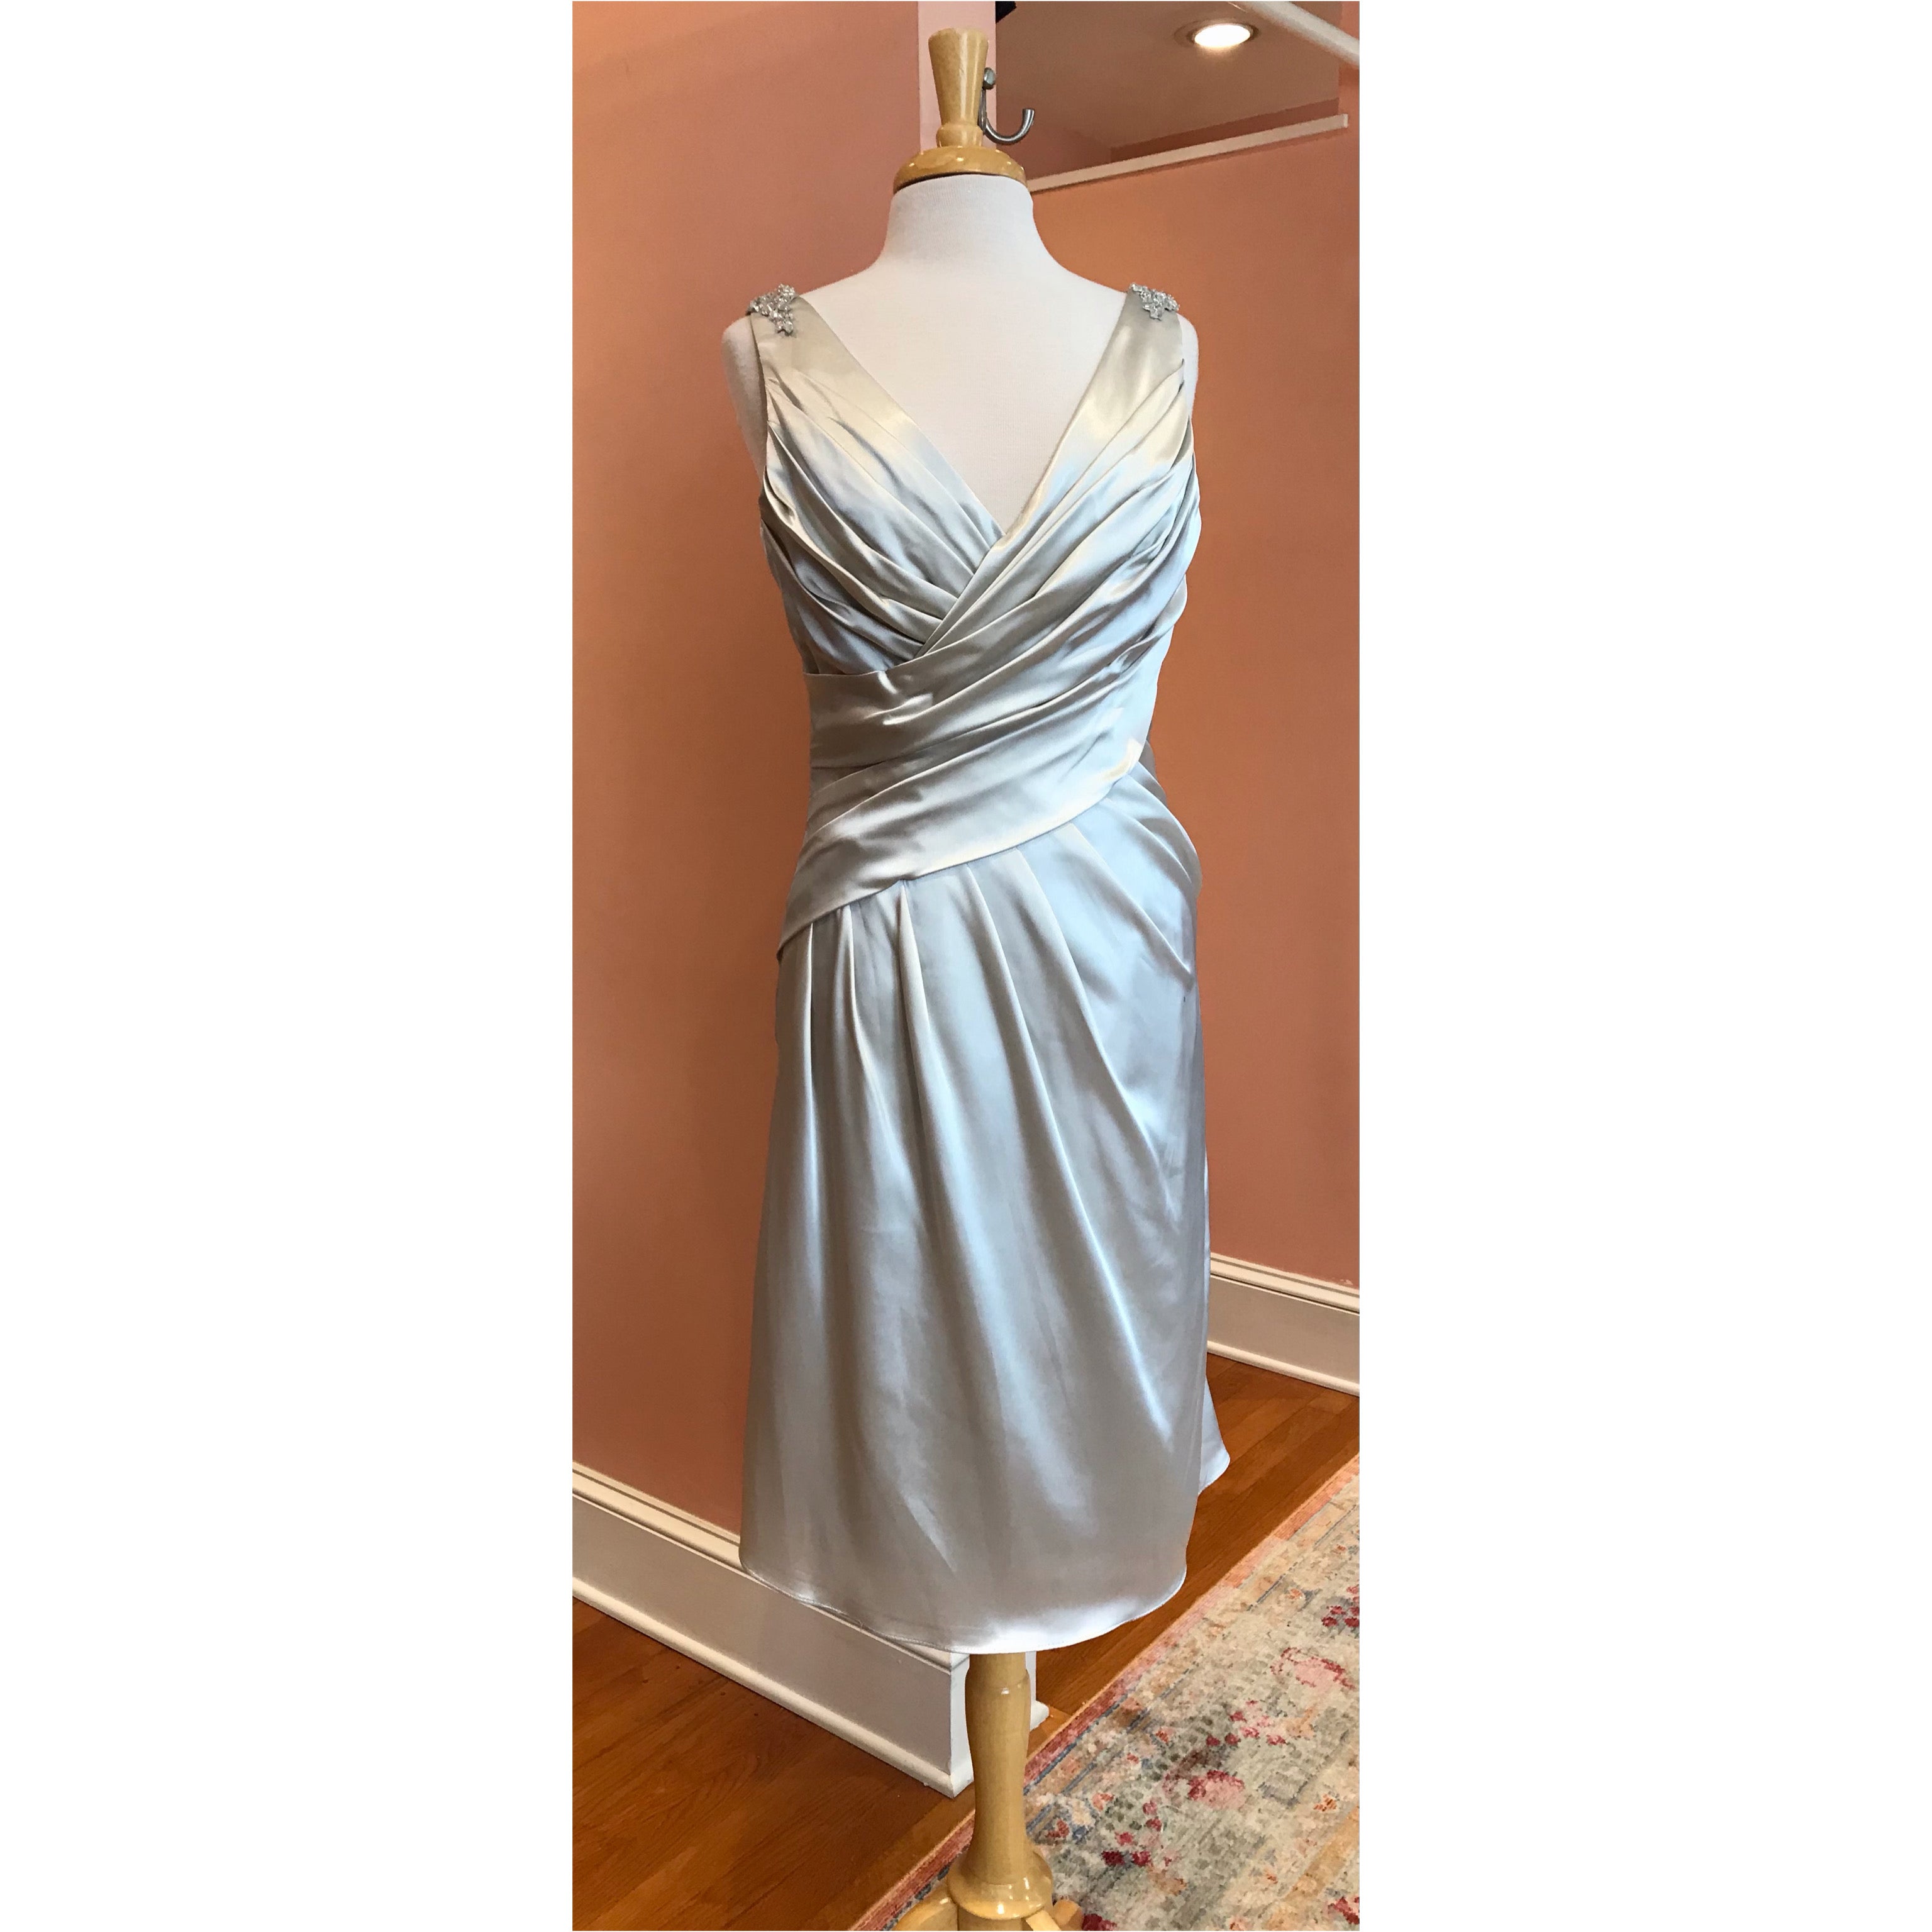 Sophia Tolli silver dress, size 16, NEW WITH TAGS!